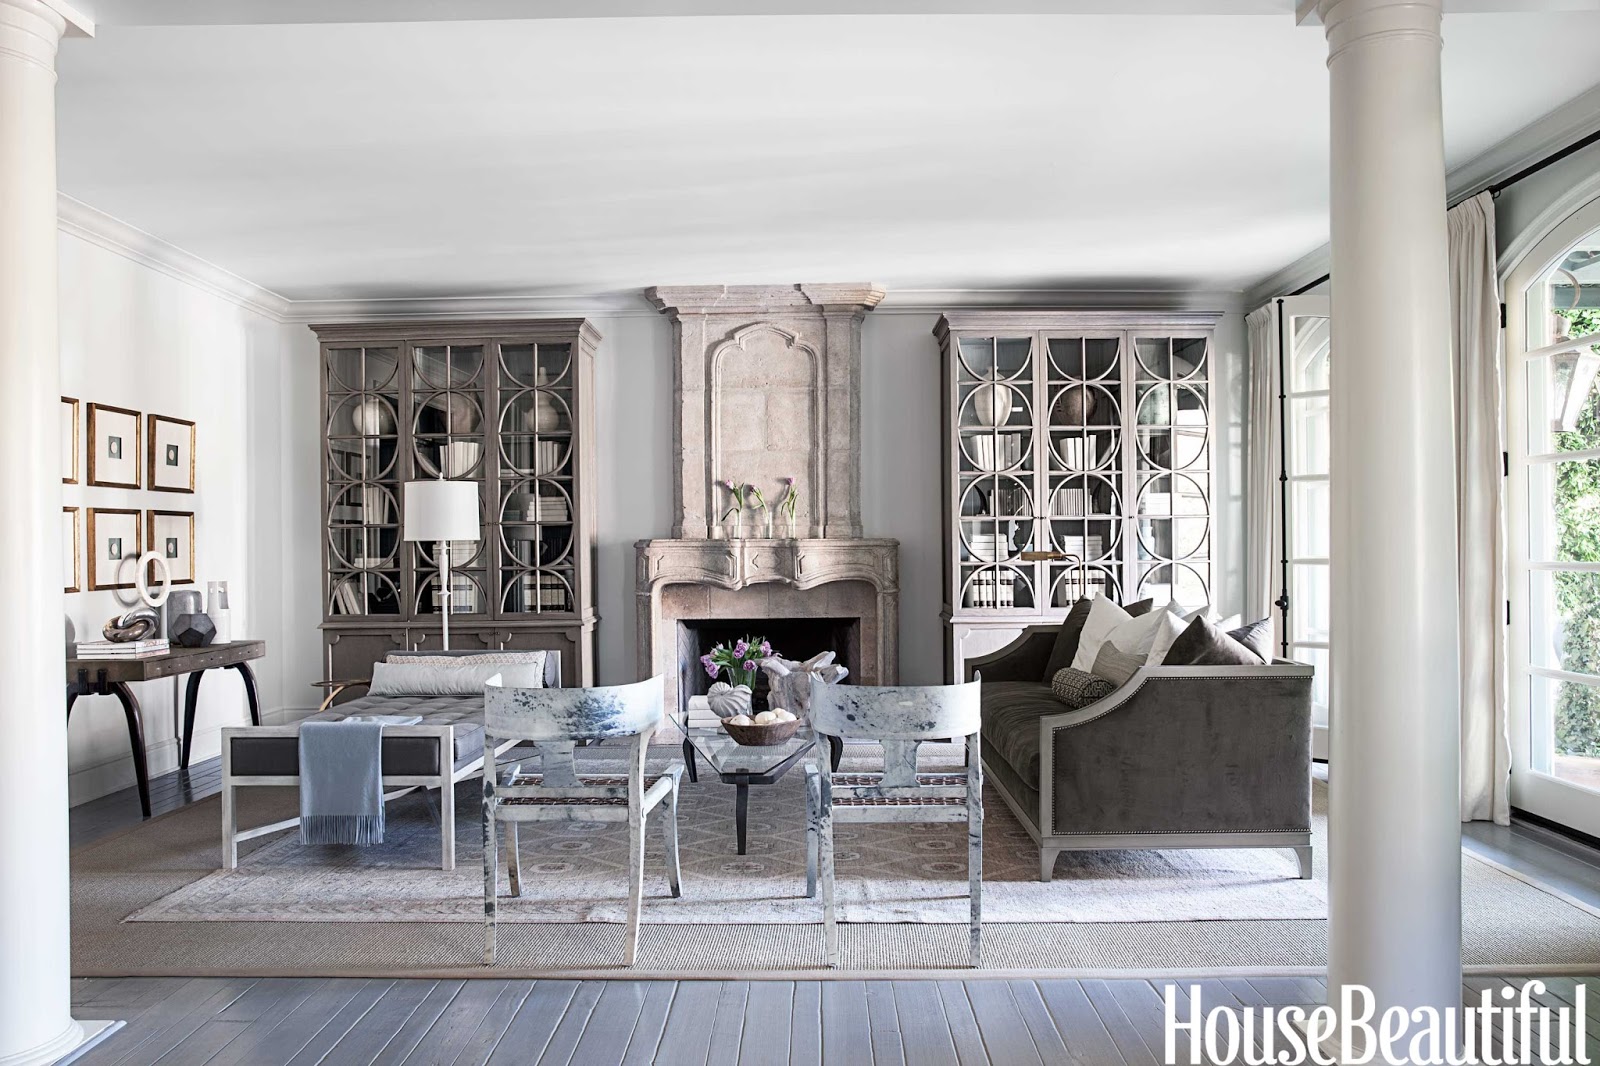  DESIGNER  MARY MCDONALD CLEANSES THE COLOR  PALETTE HOUSE  